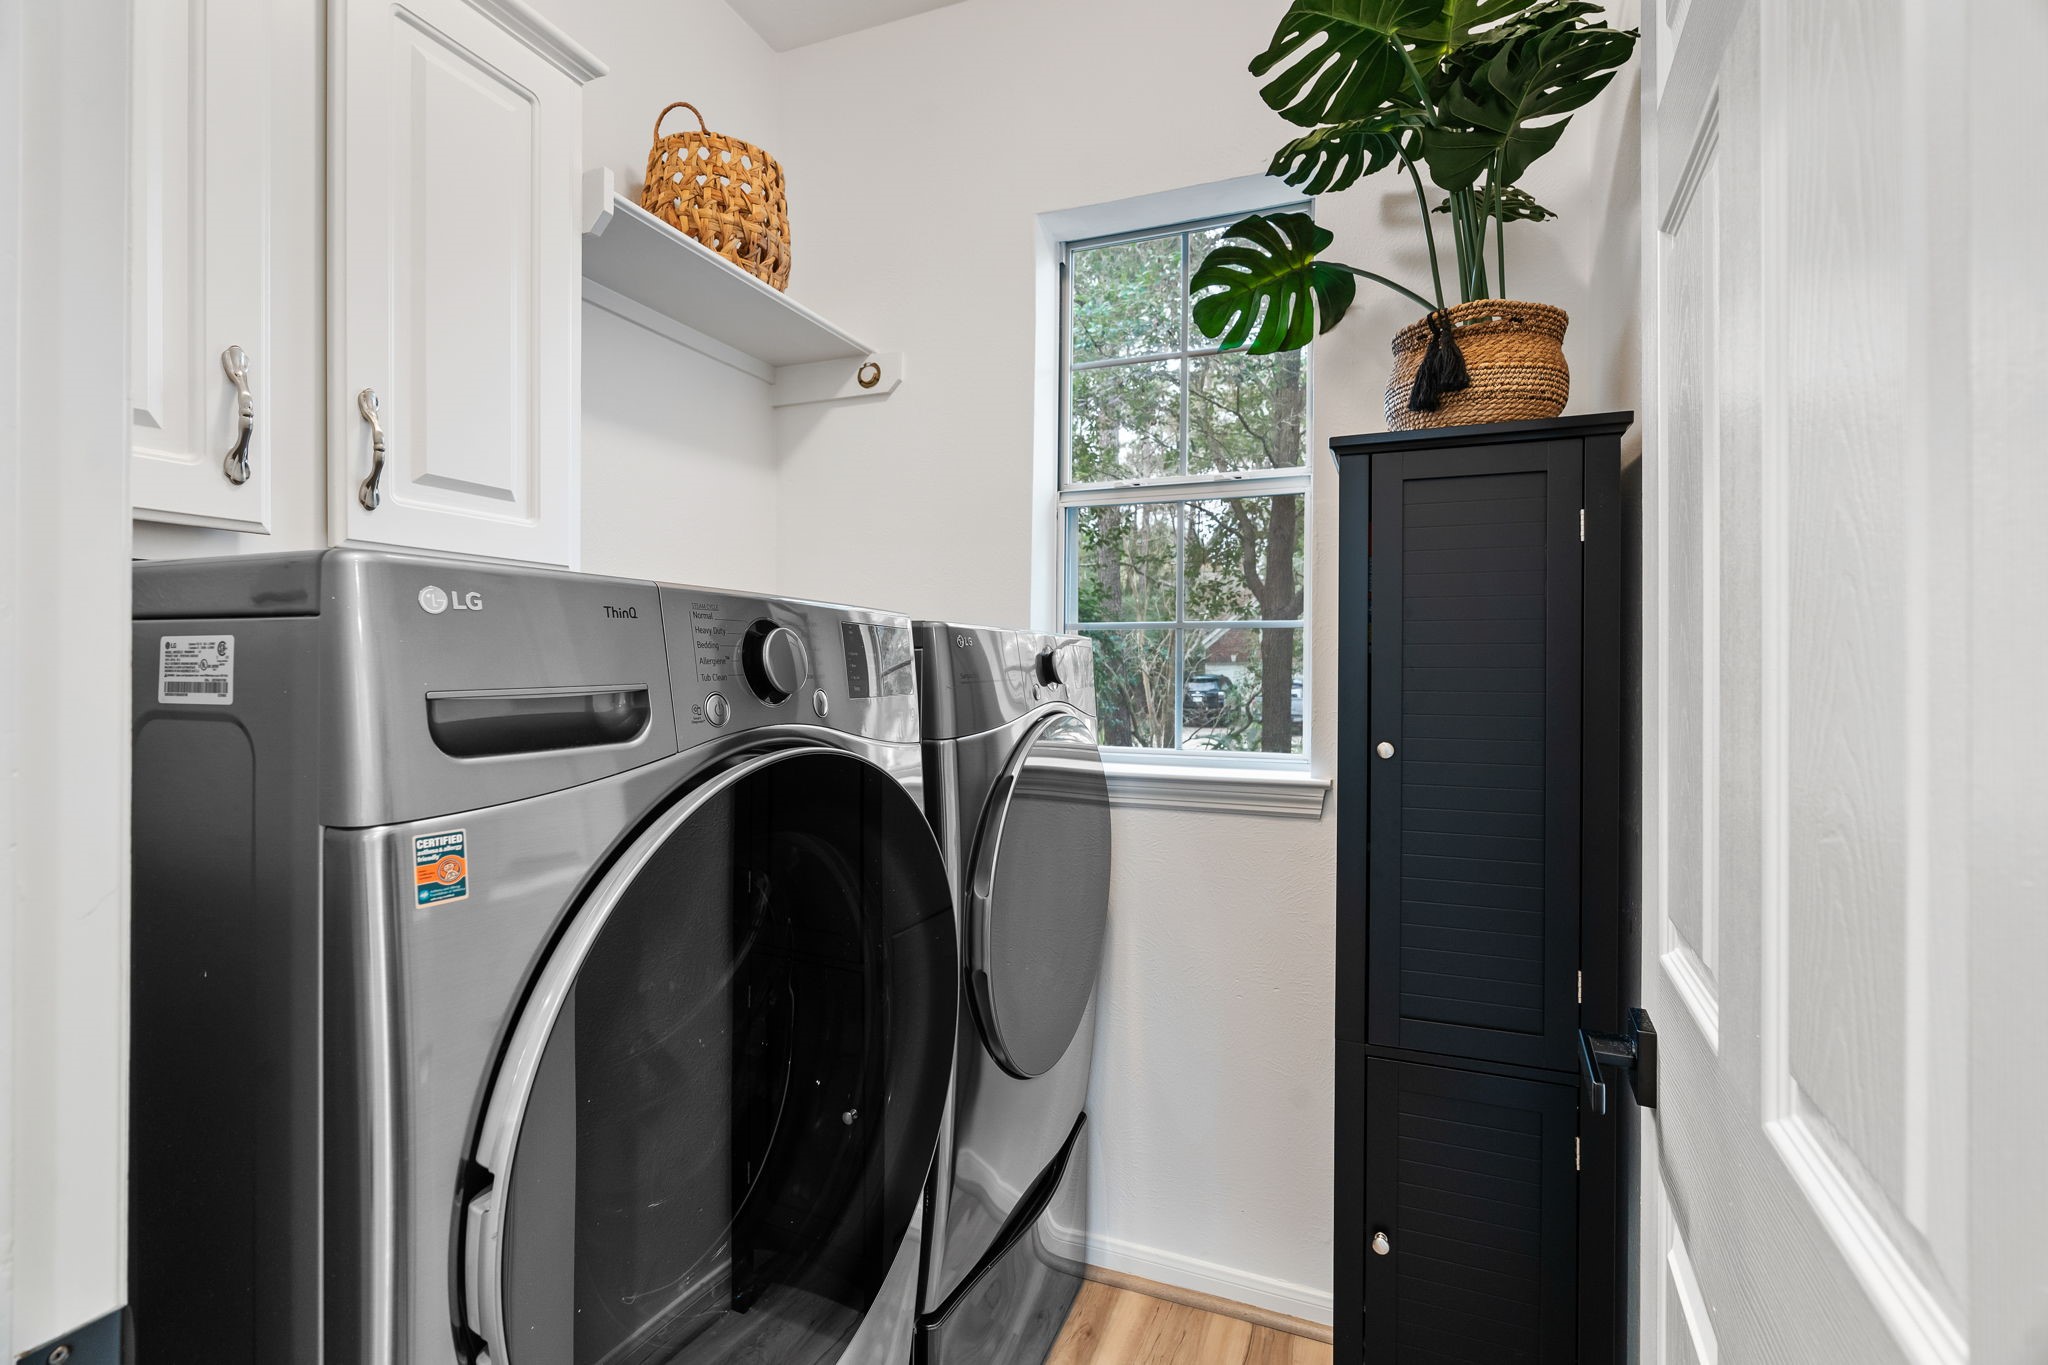 The laundry room is located just off the kitchen and has a window to the front.